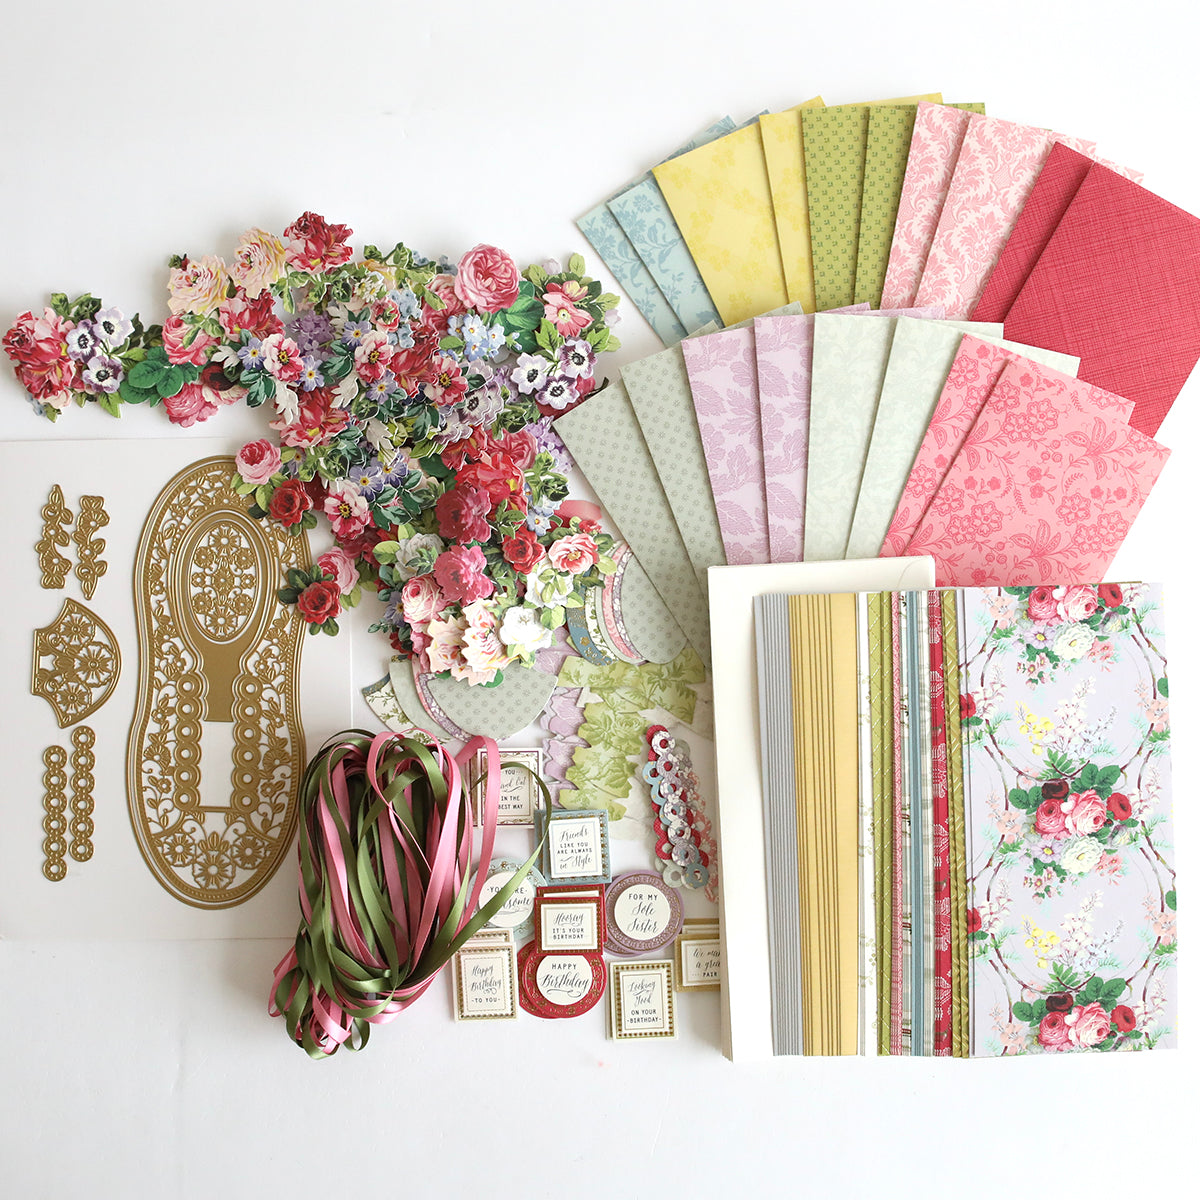 Assorted scrapbooking materials including patterned papers, floral embellishments, stickers, Paper Sneakers Finishing School Craft Box, and ribbons on a white surface.